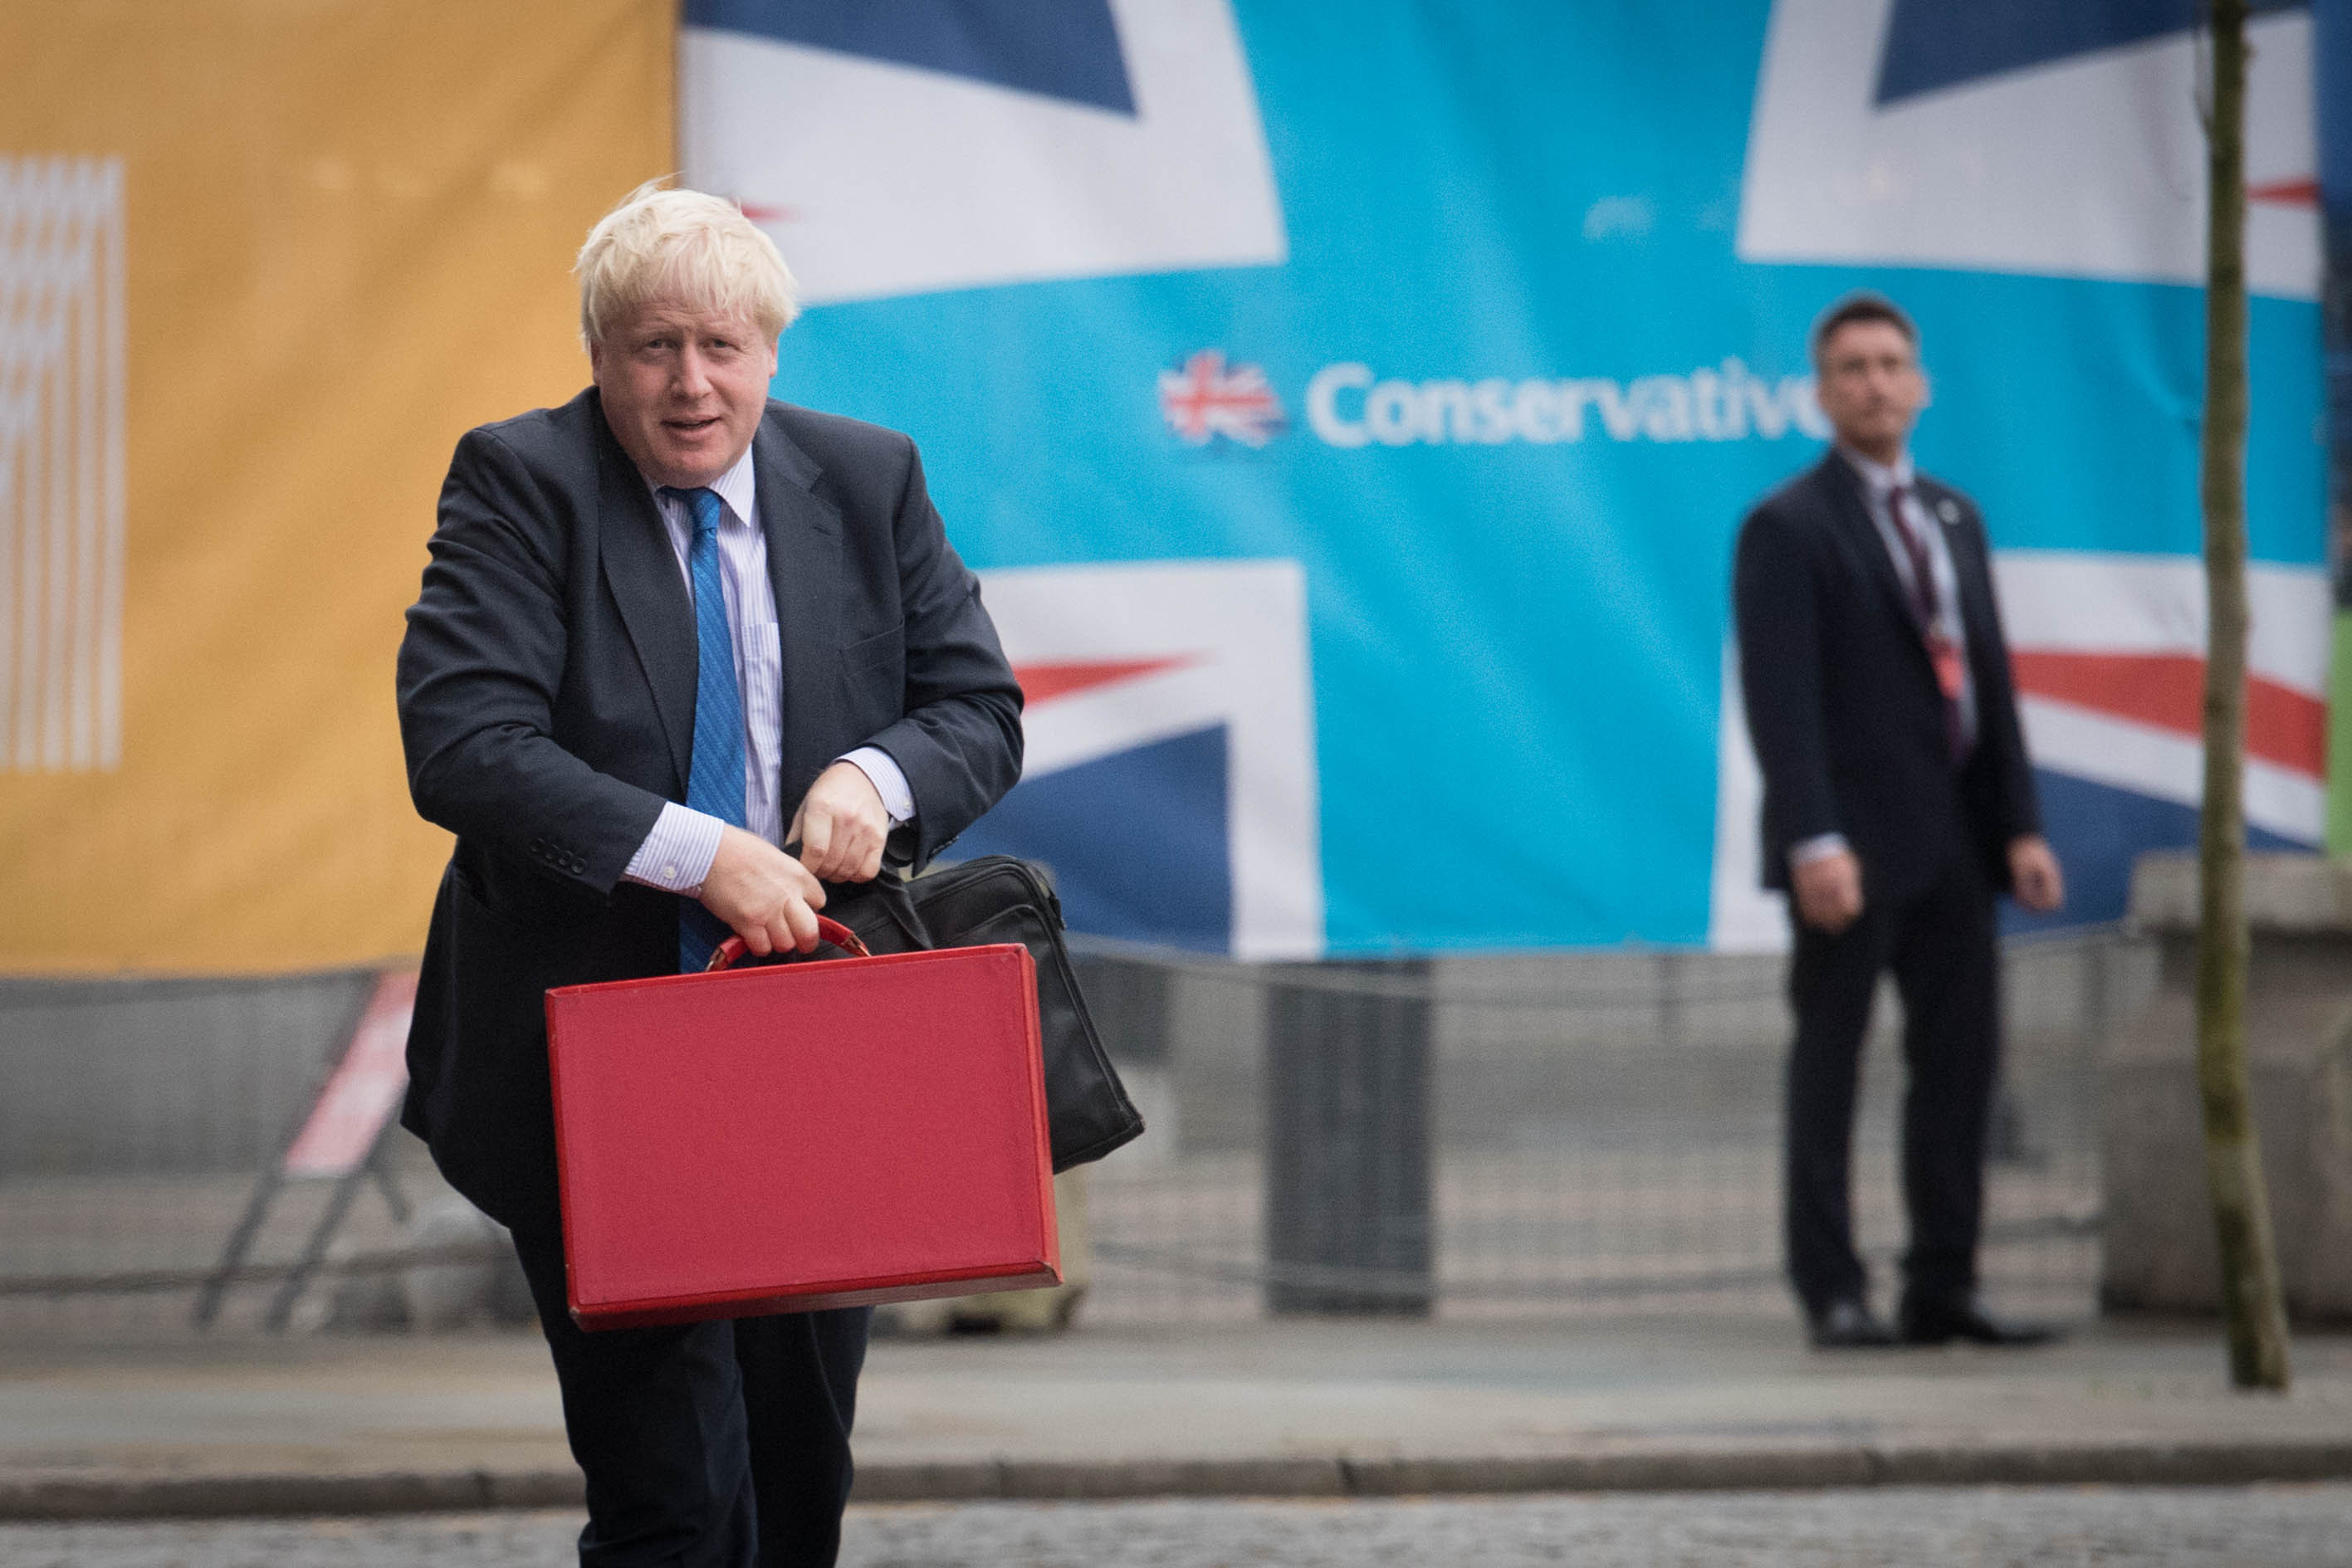 Foreign Secretary Boris Johnson arrives at the Conservative Party Conference at the Manchester Central Convention Complex in Manchester.